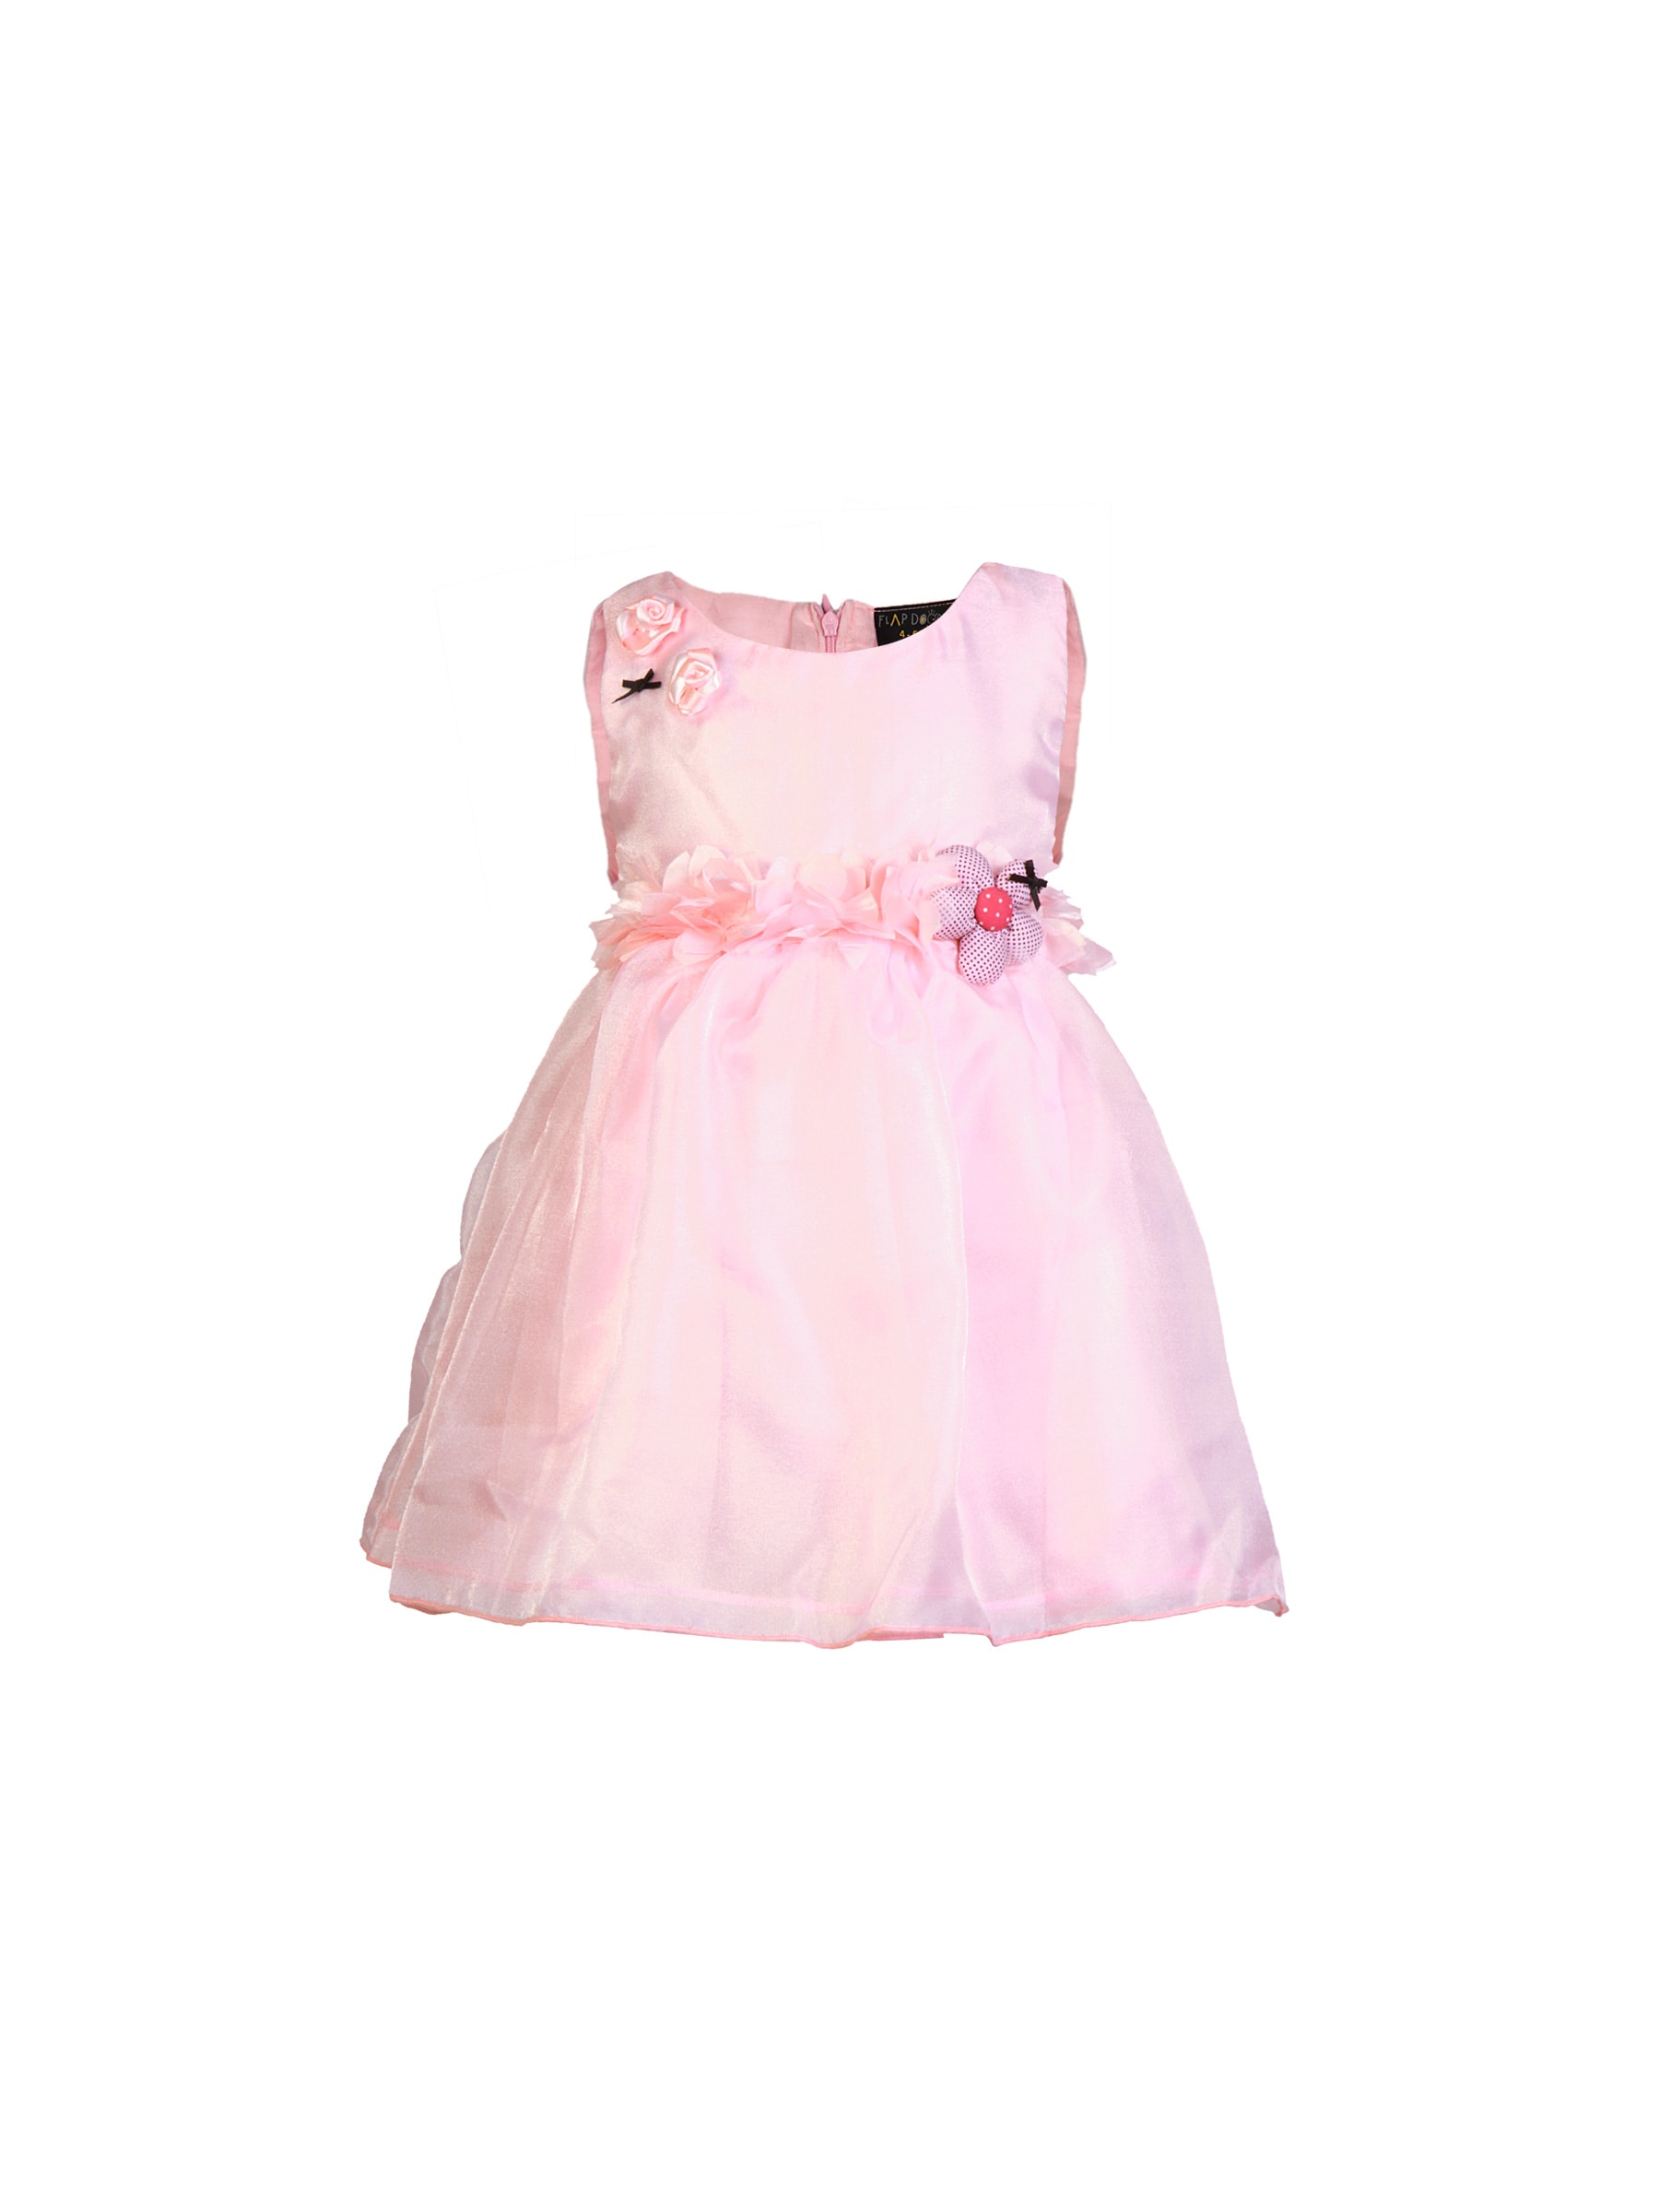 Doodle Kids Girls Party Frock Pink Dress